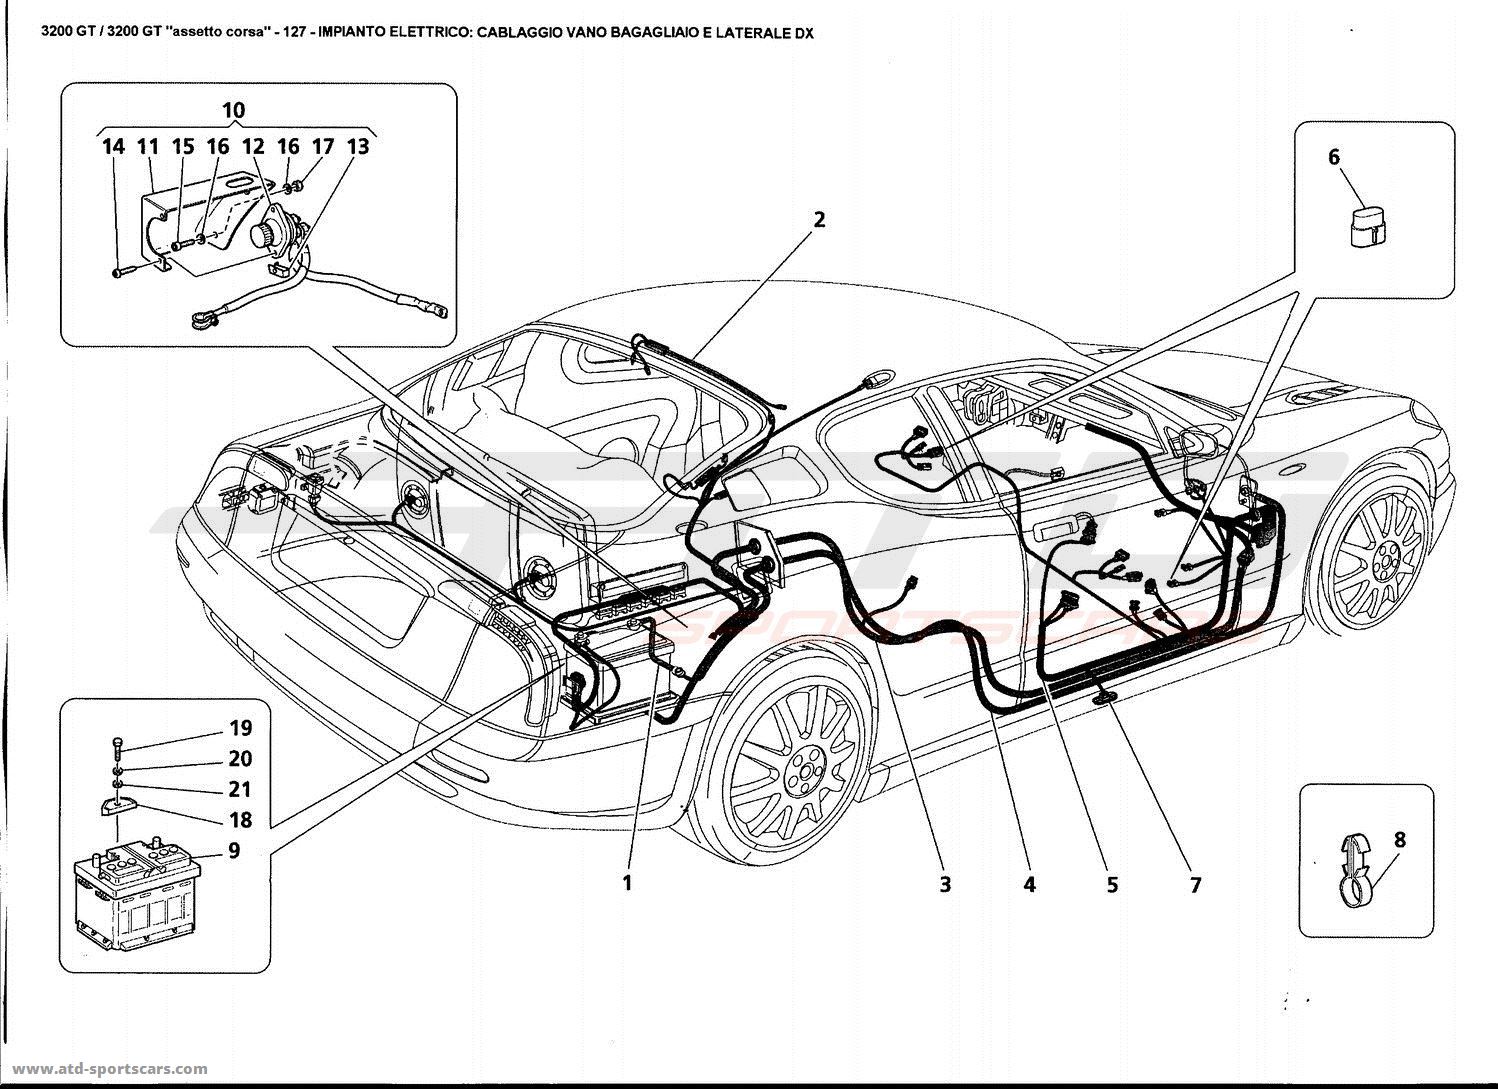 ELECTRICAL SYSTEM: BOOT AND RH SIDE HARNESS